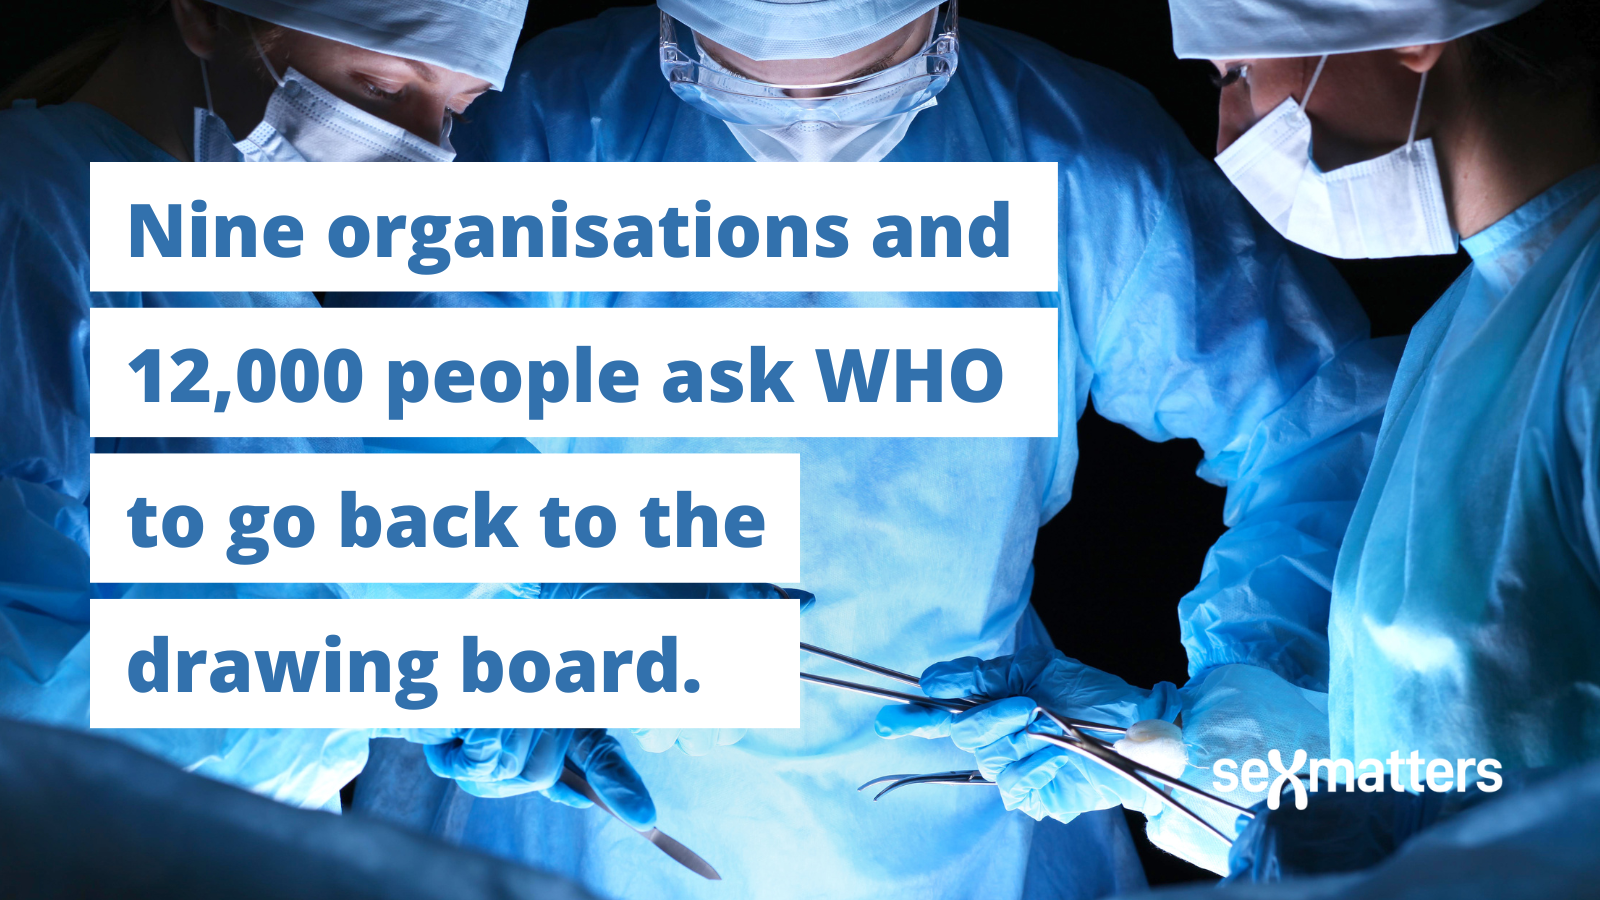 Nine organisations and 12,000 people ask WHO to go back to the drawing board.